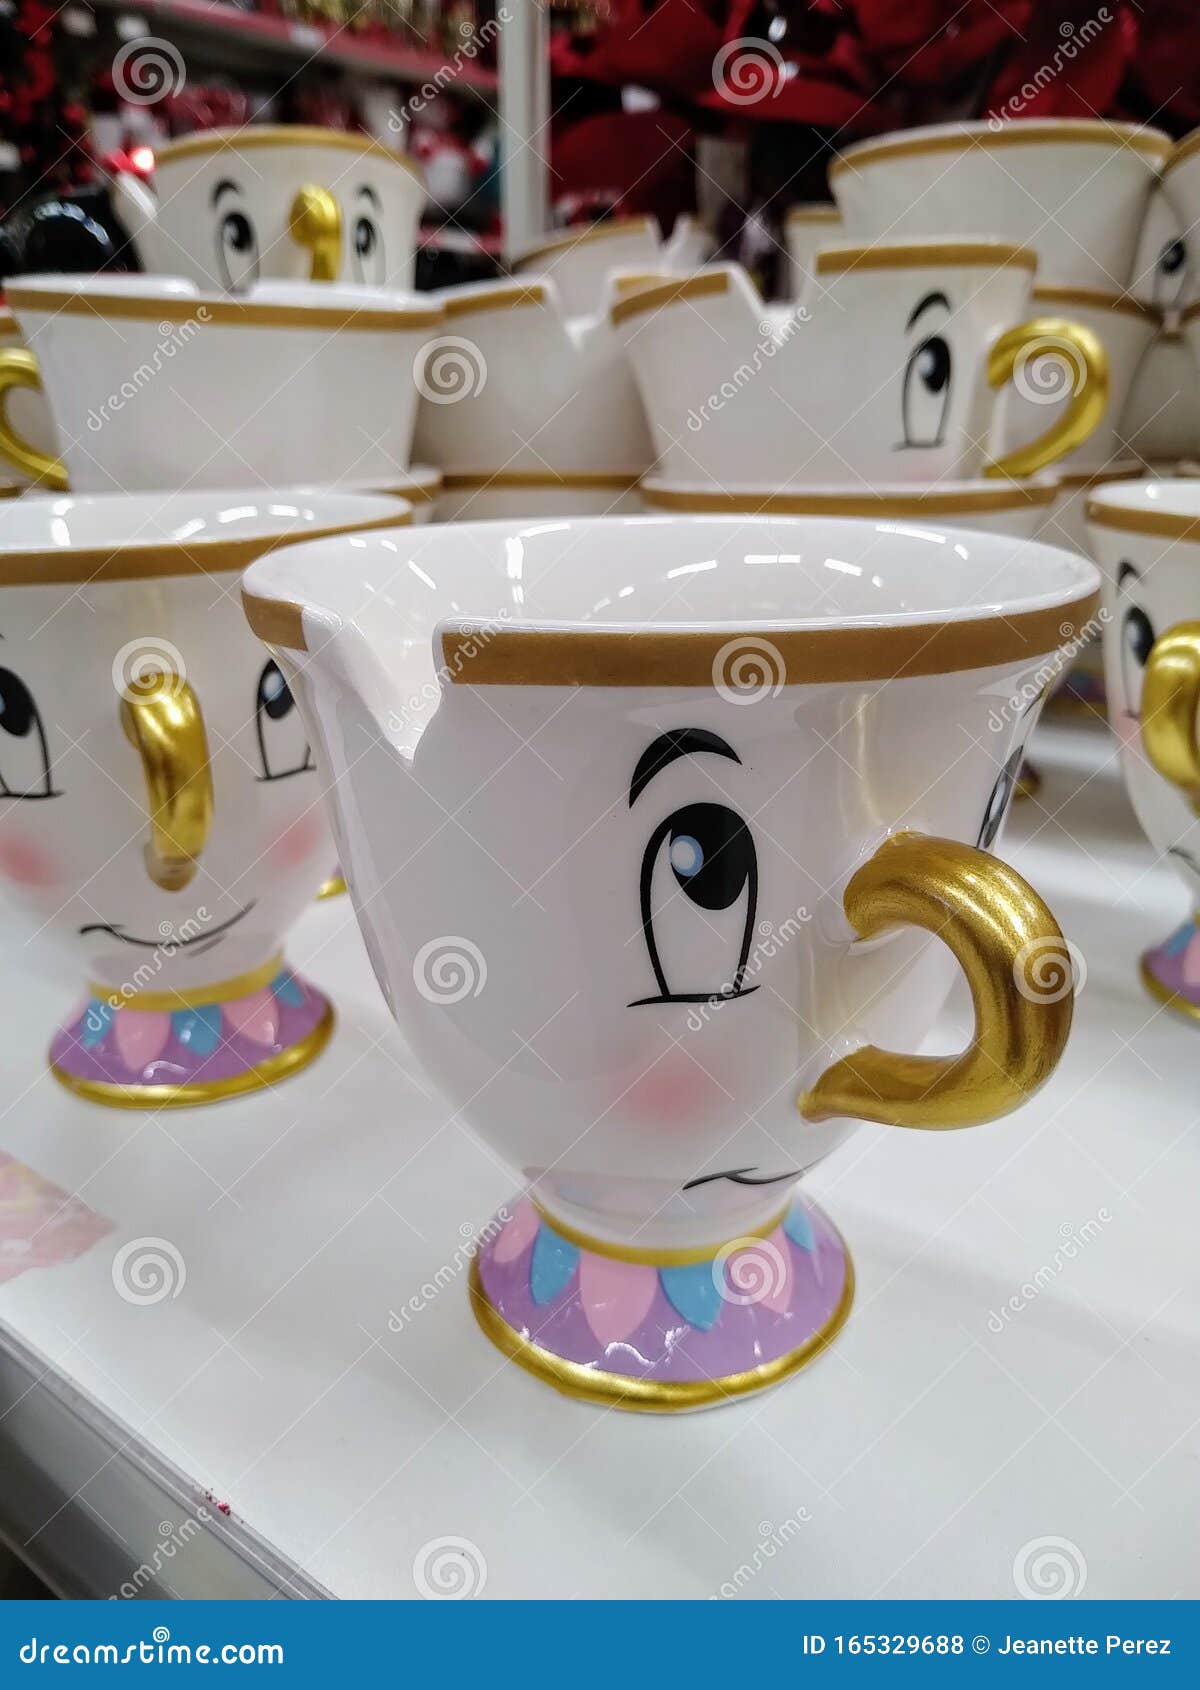 Chip Mug From The Movie Of The Beauty The Beast Of Disney Editorial Stock Photo Image Of Tale Chip 165329688